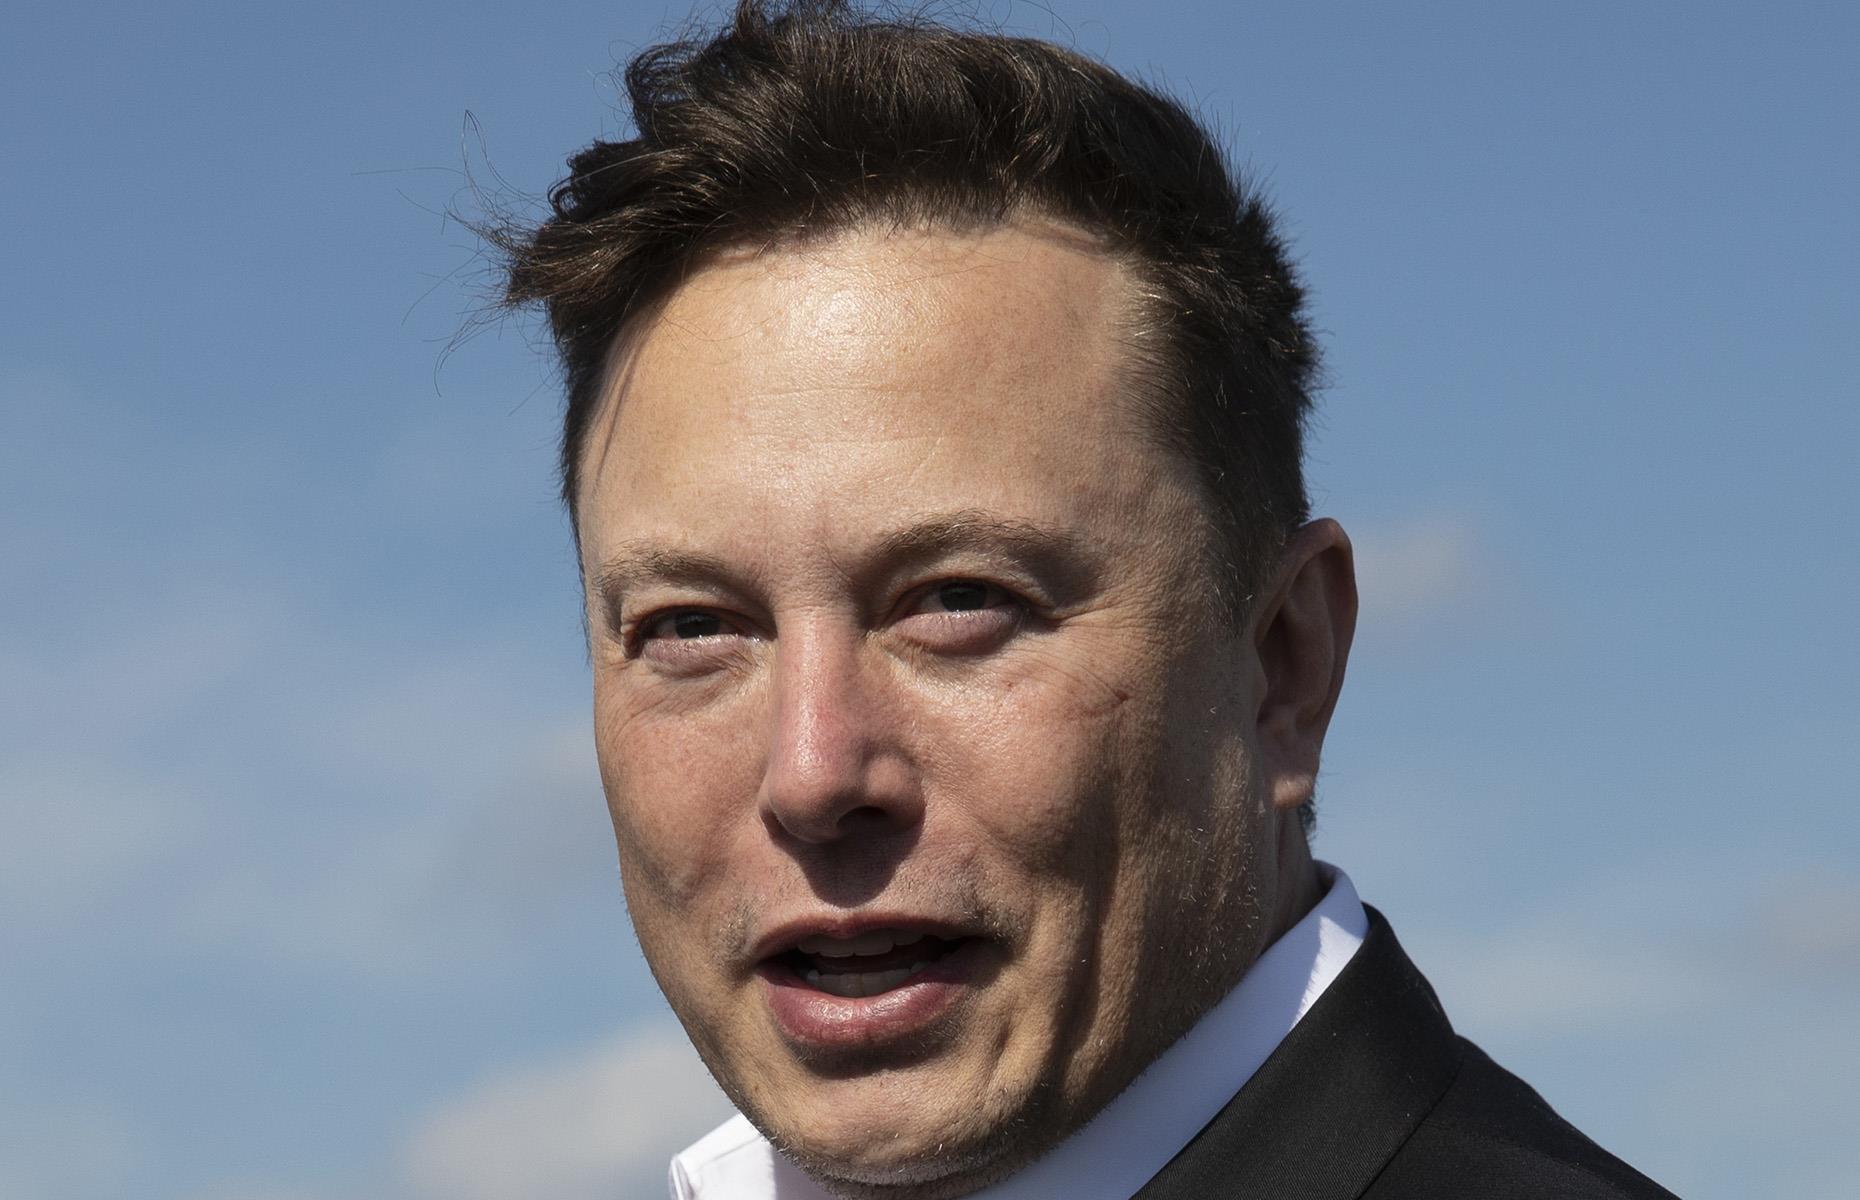 <p>Elon Musk, the sometimes-reckless tech and space pioneer, is no stranger to controversy and drama. He's currently the third richest man in the world with a stunning net worth of around $193 billion, according to <em>Forbes</em>. But juggernaut bank balance aside, who's the <em>real</em> Elon Musk? </p>  <p>From an early start in coding to his influence over the world's most powerful people, <strong>click or scroll on to </strong><strong>discover 26 surprising facts you might not know about the billionaire. </strong>All dollar amounts are in US dollars.</p>